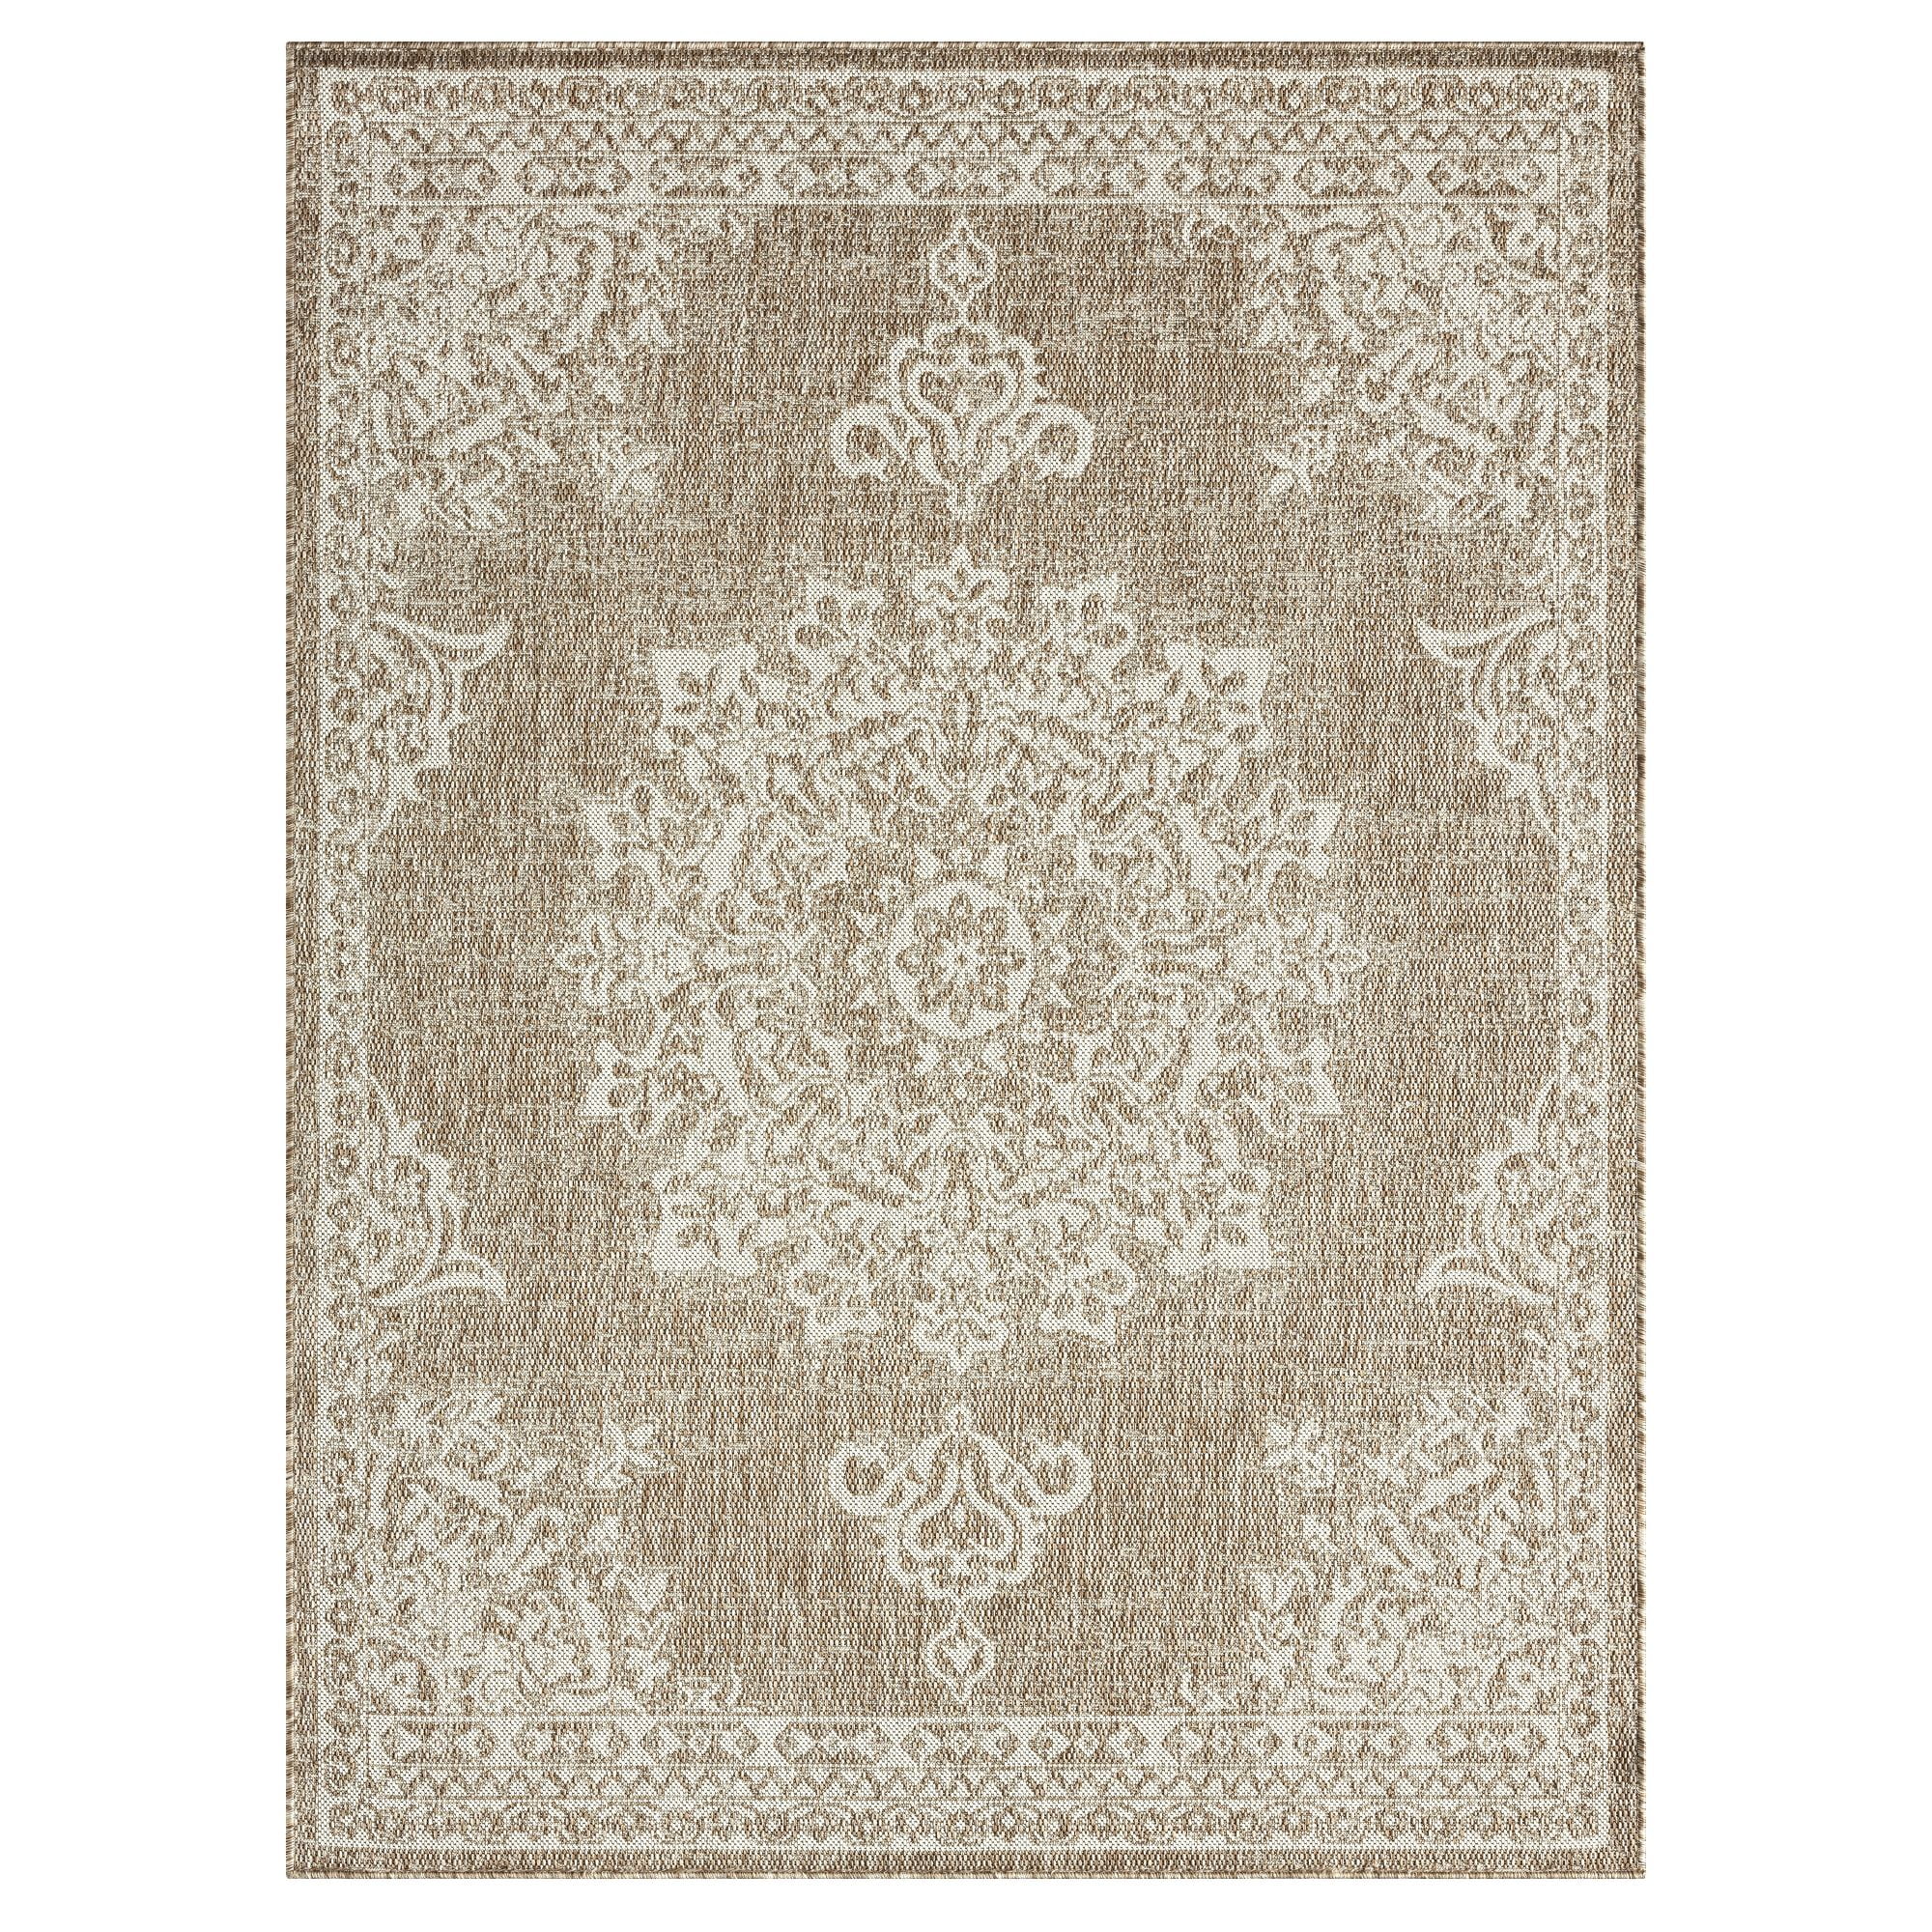 Taupe Sunflower Outdoor Rug 5 Ft Round – Welcome Home by DII